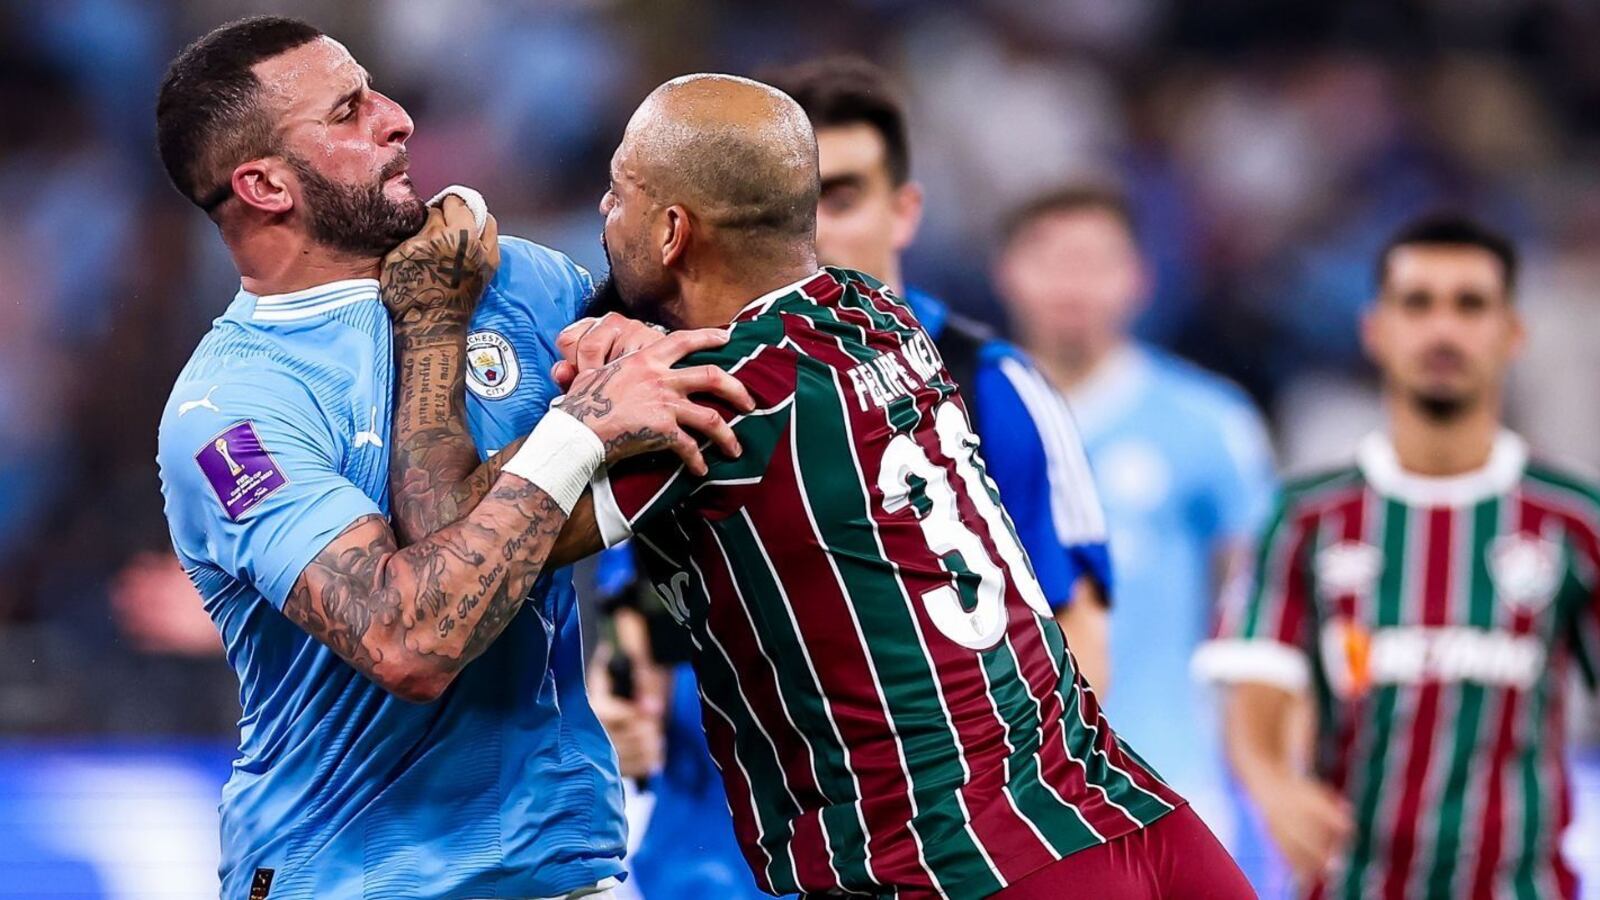 (VIDEO) Felipe Melo again, the Brazilian's new brawl after losing to Manchester City